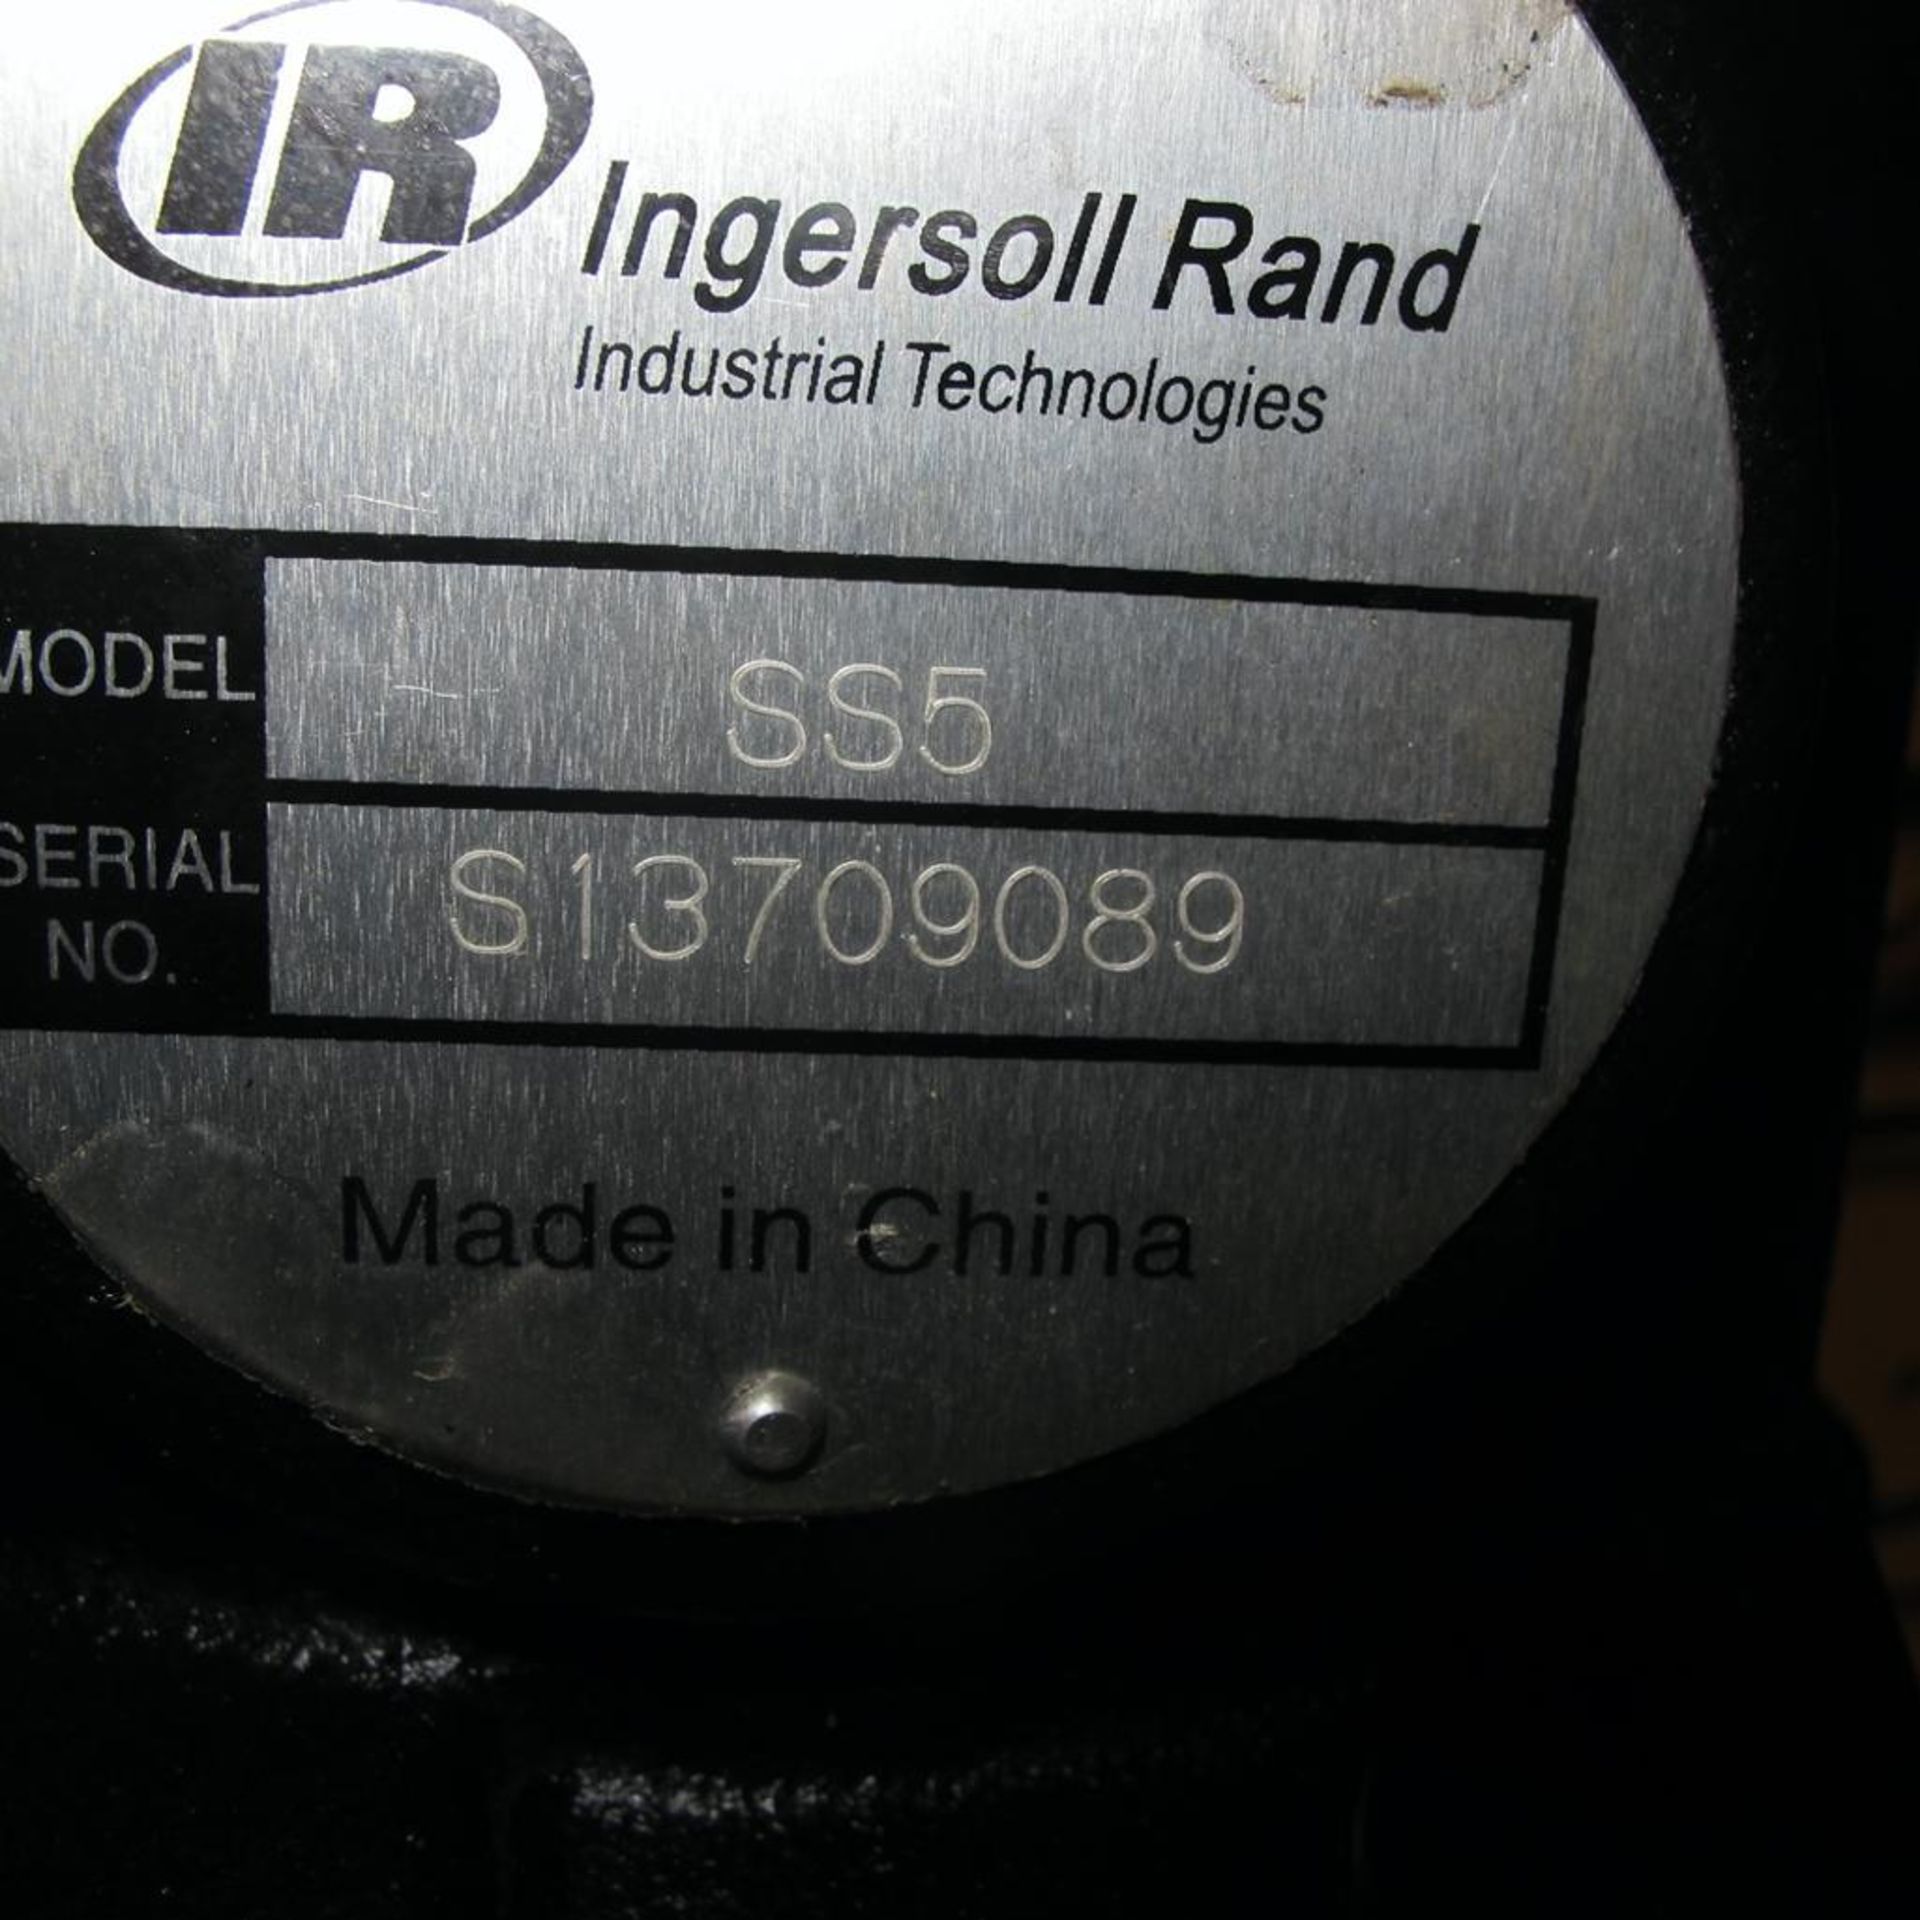 INGERSOLL RAND MODEL SS5, 5 HP UPRIGHT AIR COMPRESSOR, S/N S13709089 (MAIN BLDG) - Image 2 of 2